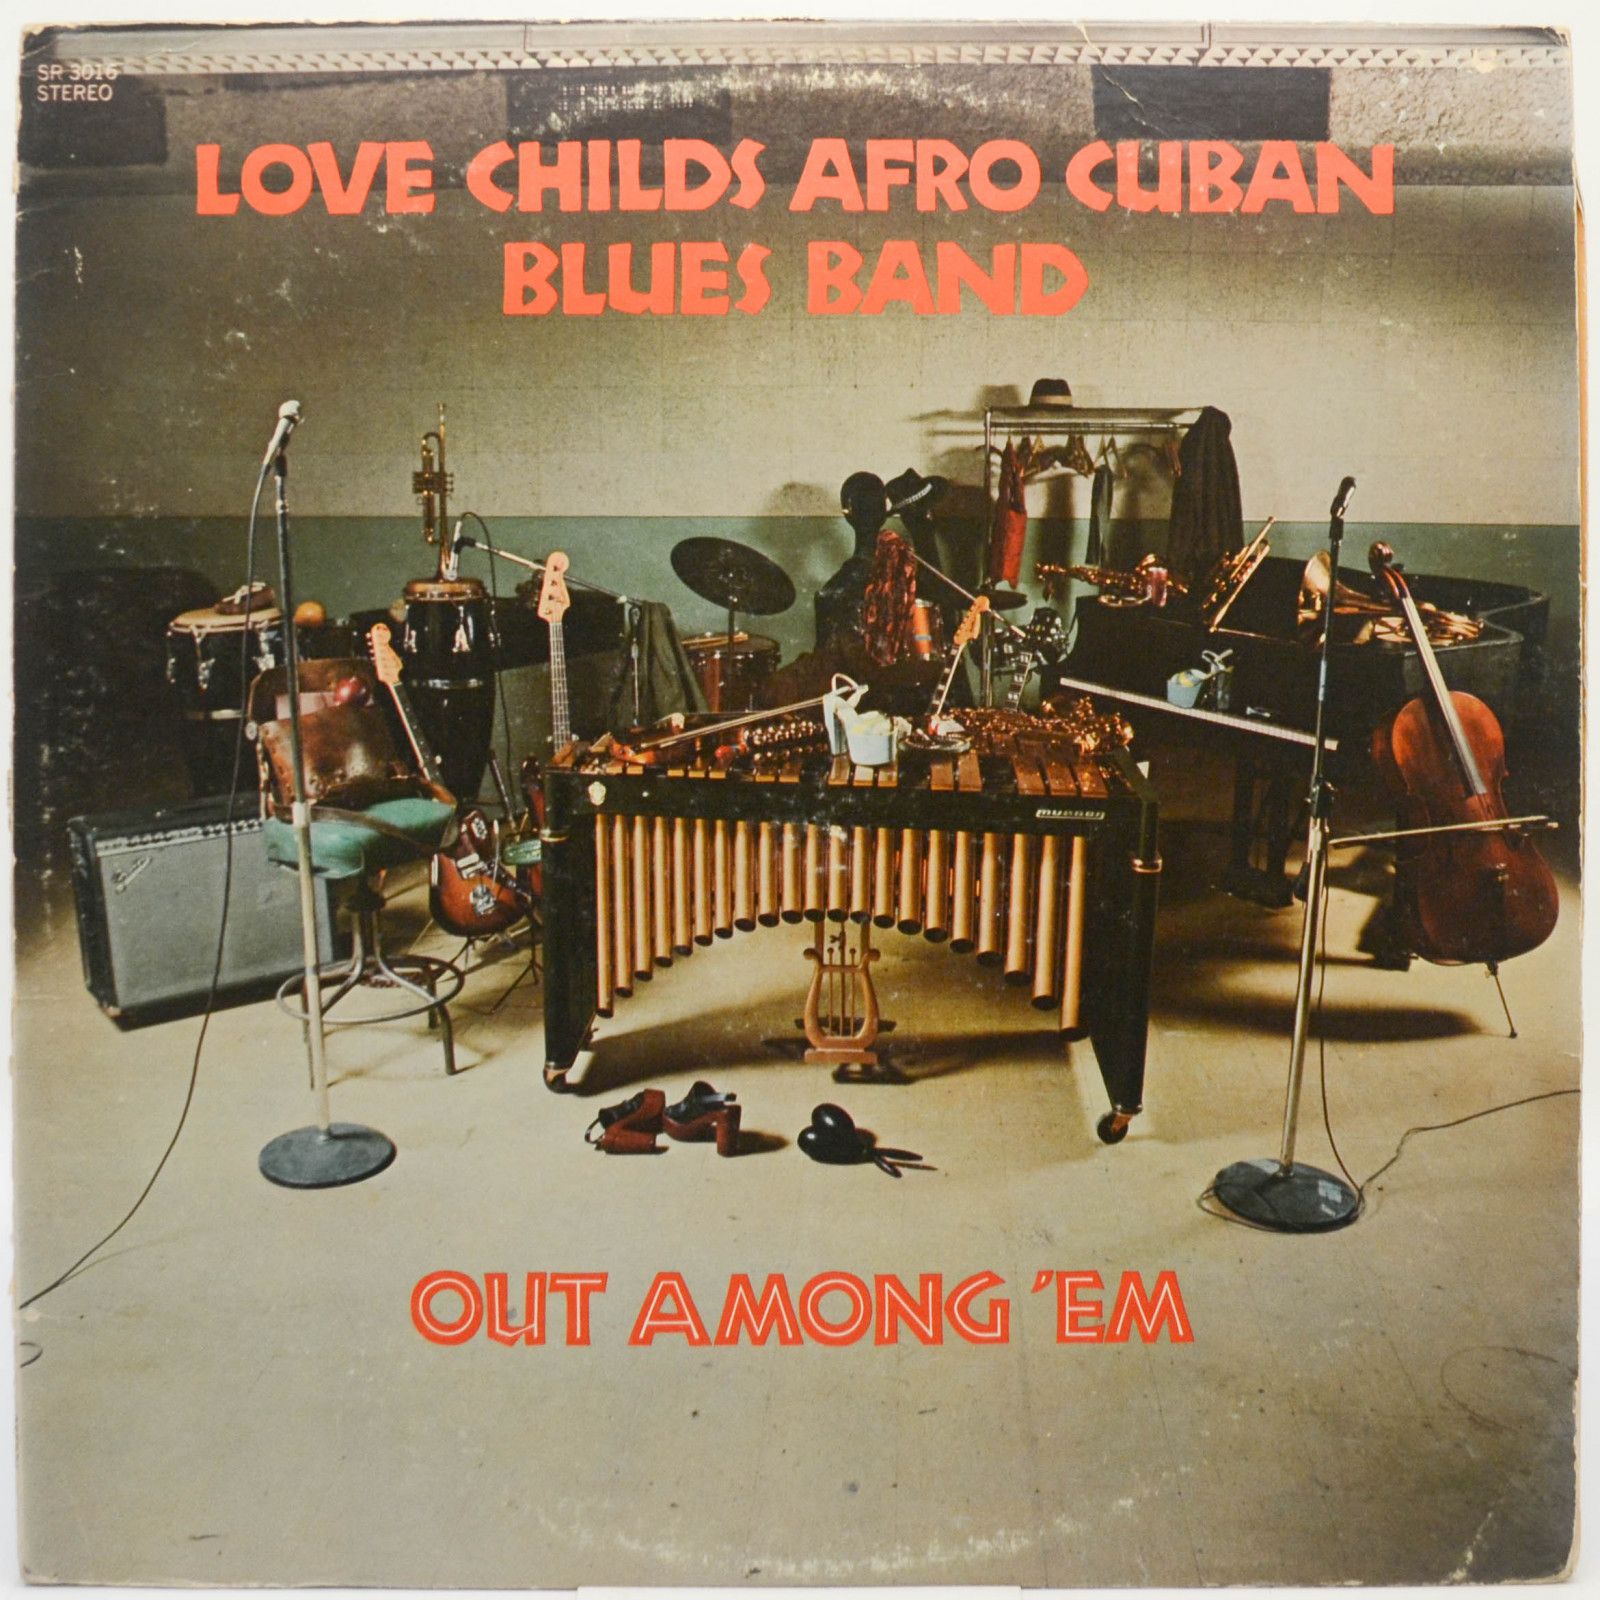 Love Childs Afro Cuban Blues Band — Out Among 'Em, 1975